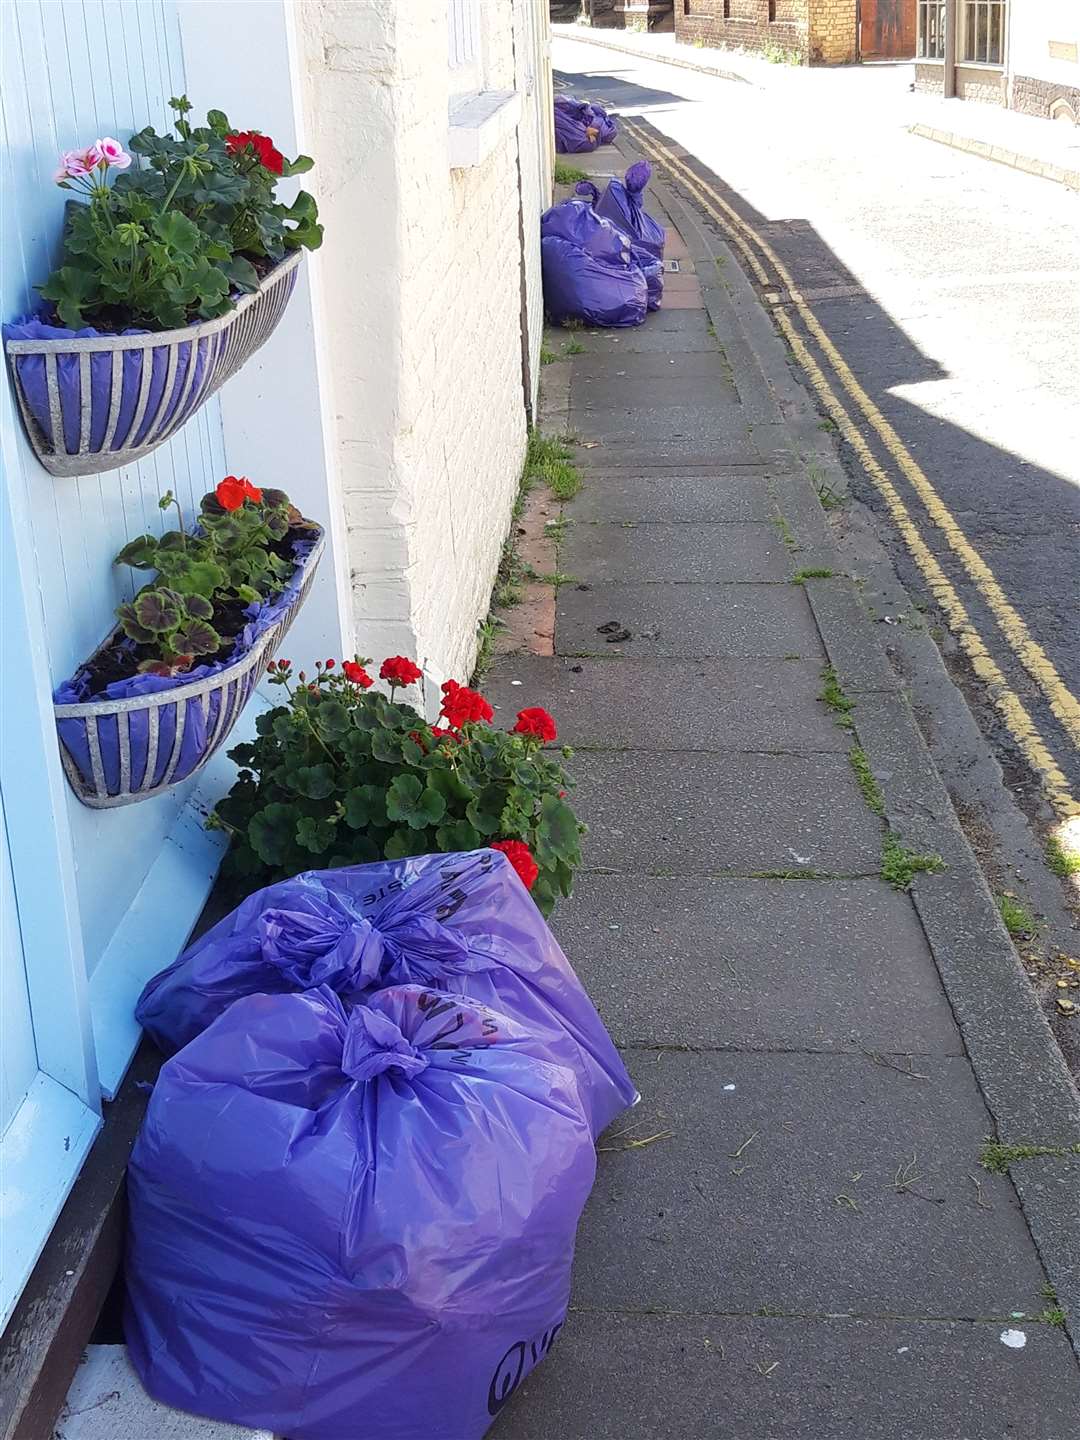 Usually picturesque, the binbags were a blight on Middle Street this weekend. Picture Susan Carlyle